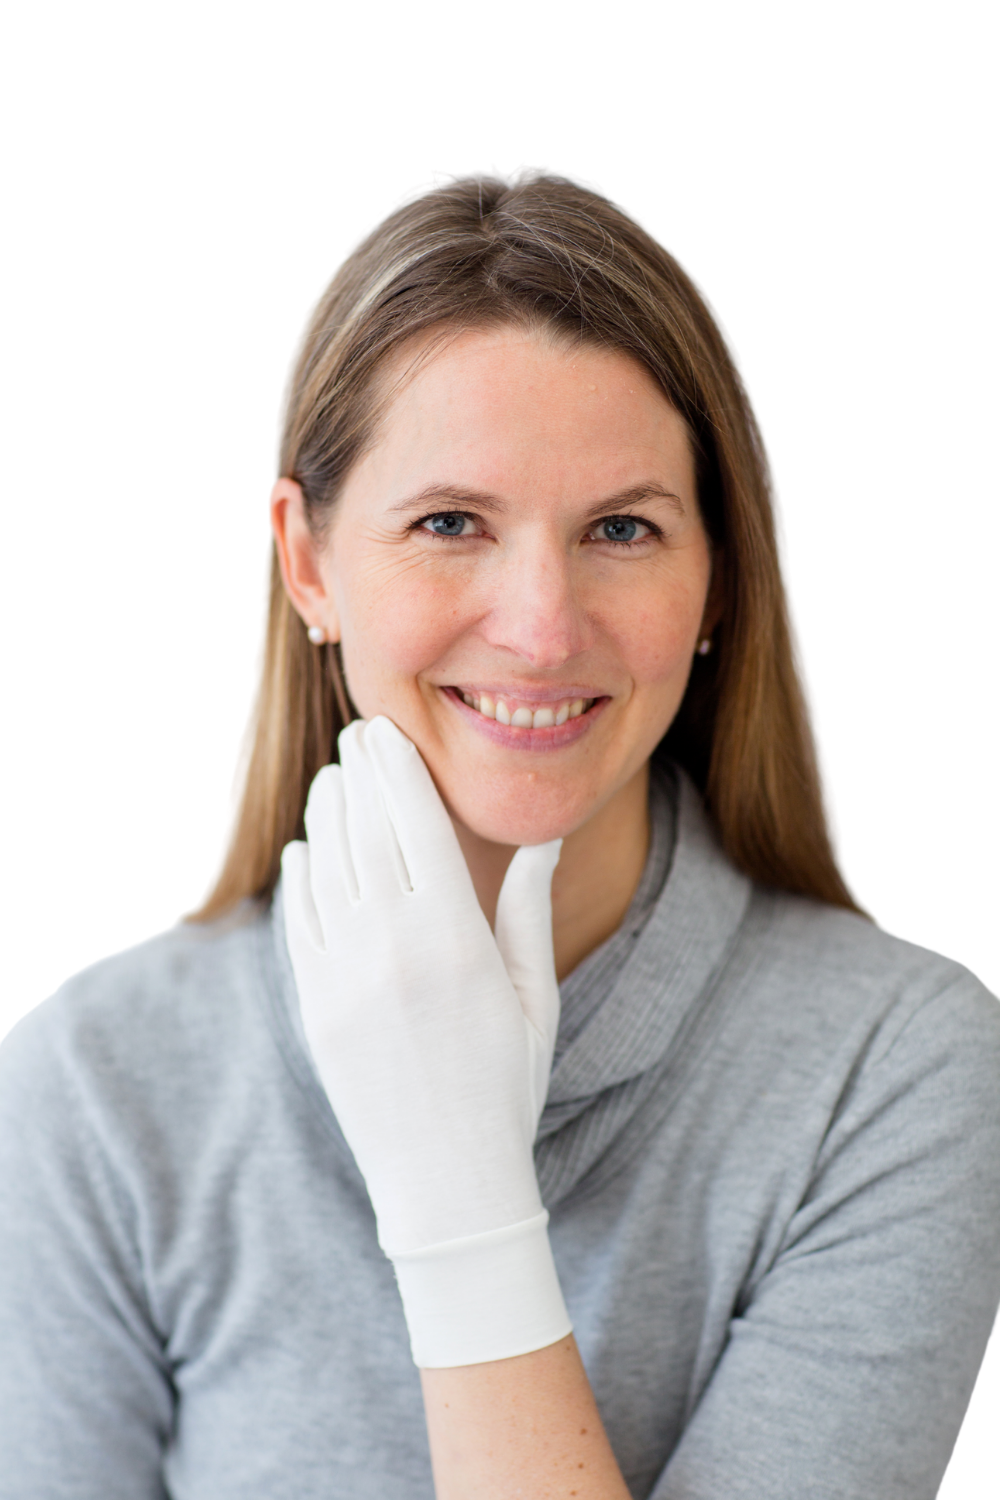 Remedywear gloves - glove treatment for hands